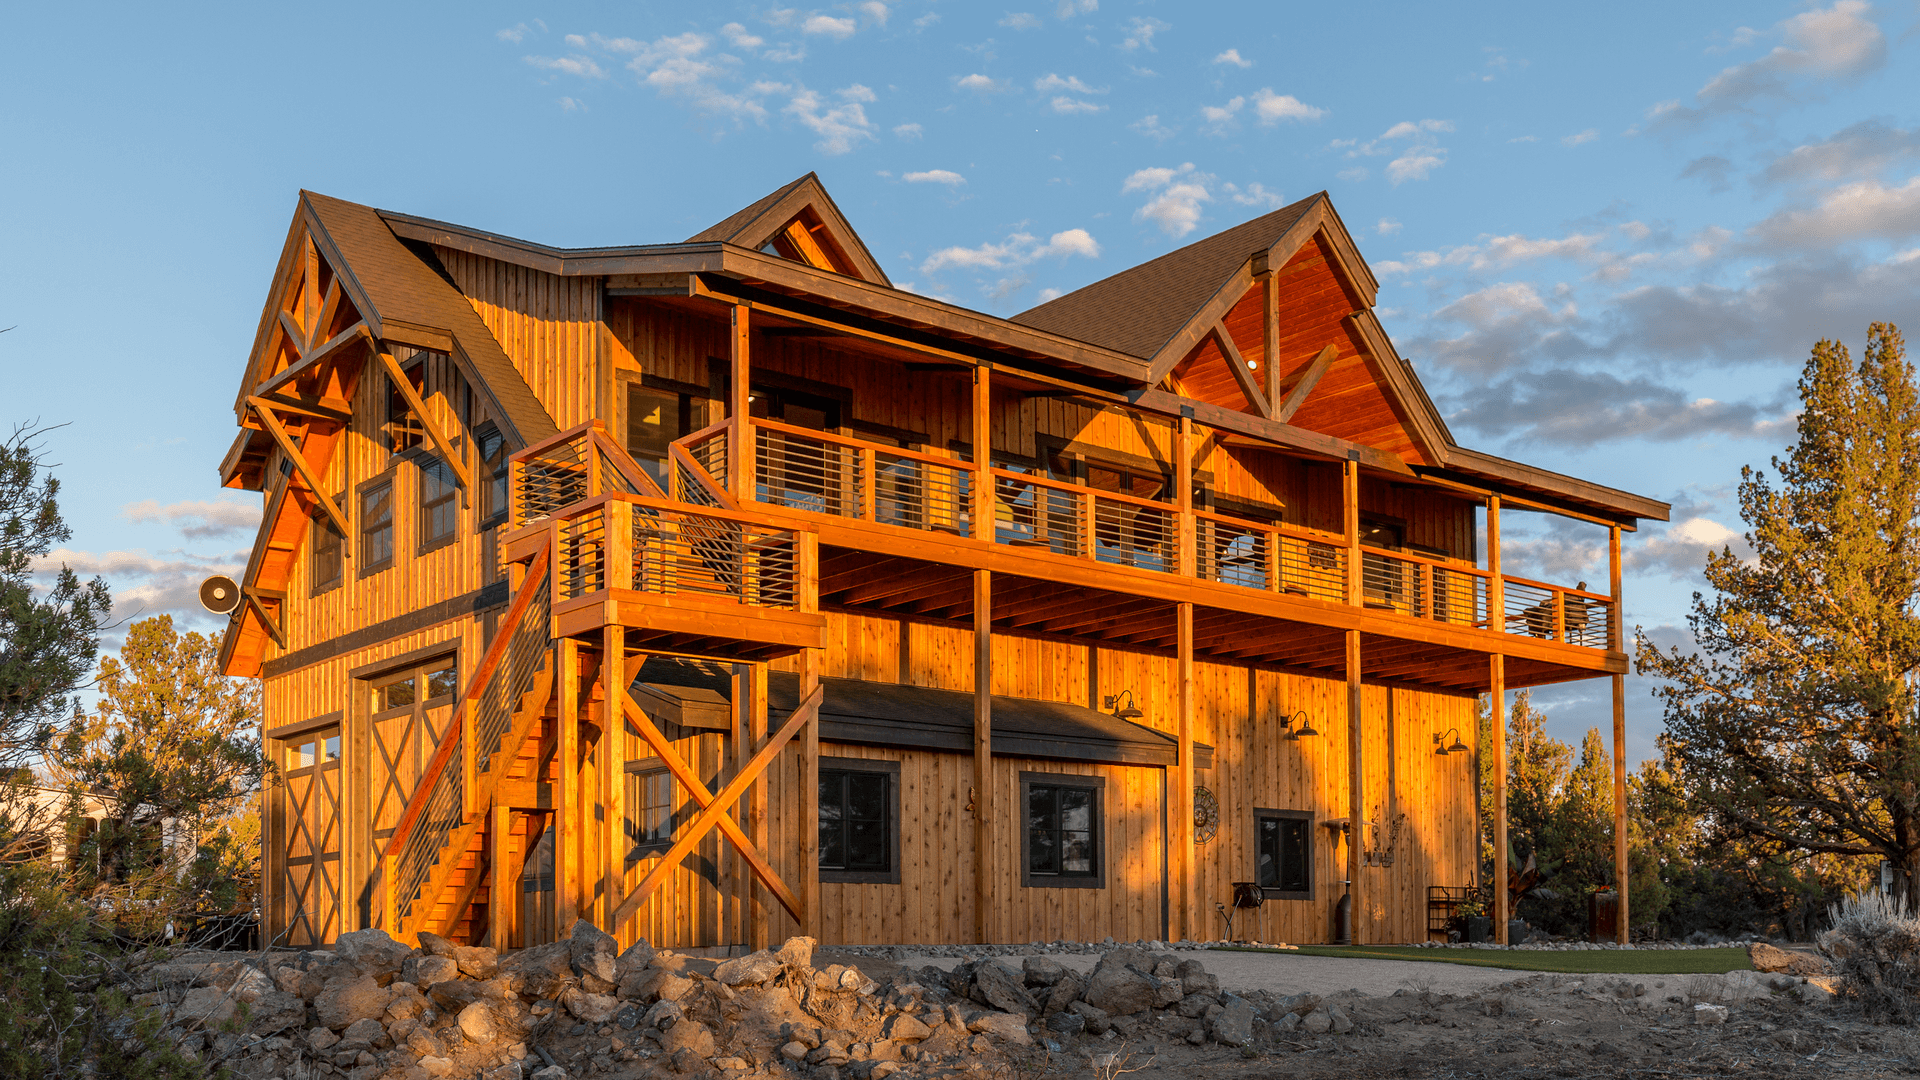 This custom barn home was designed and built by DC Builders in Bend, Oregon.